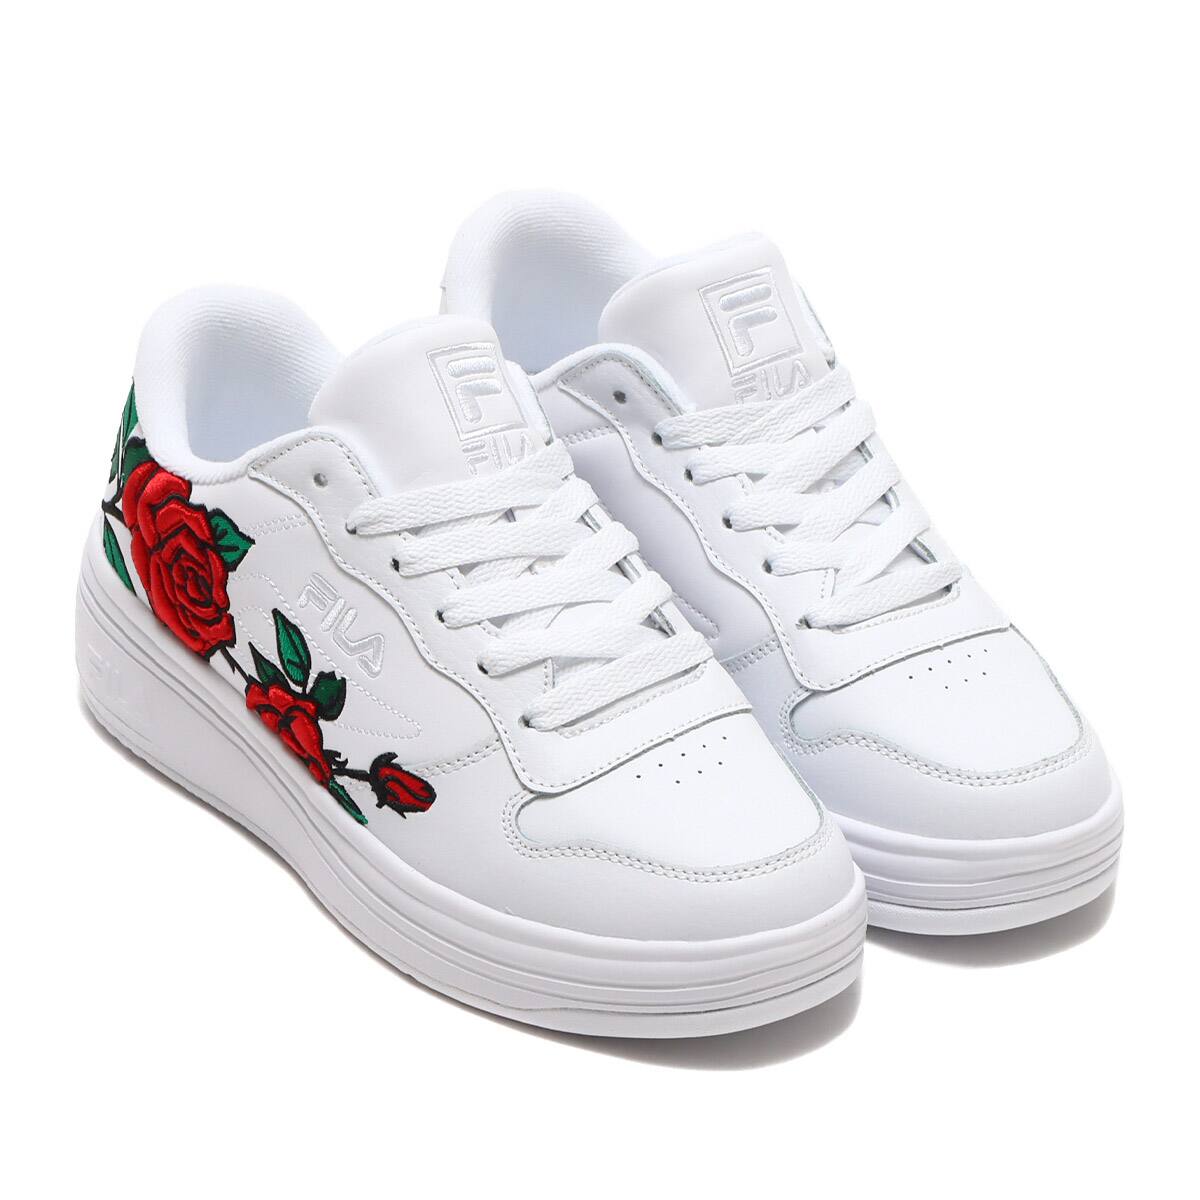 FILA WX-100 FLORAL White/Fila Red/Jelly Bean 23SS-I_photo_large